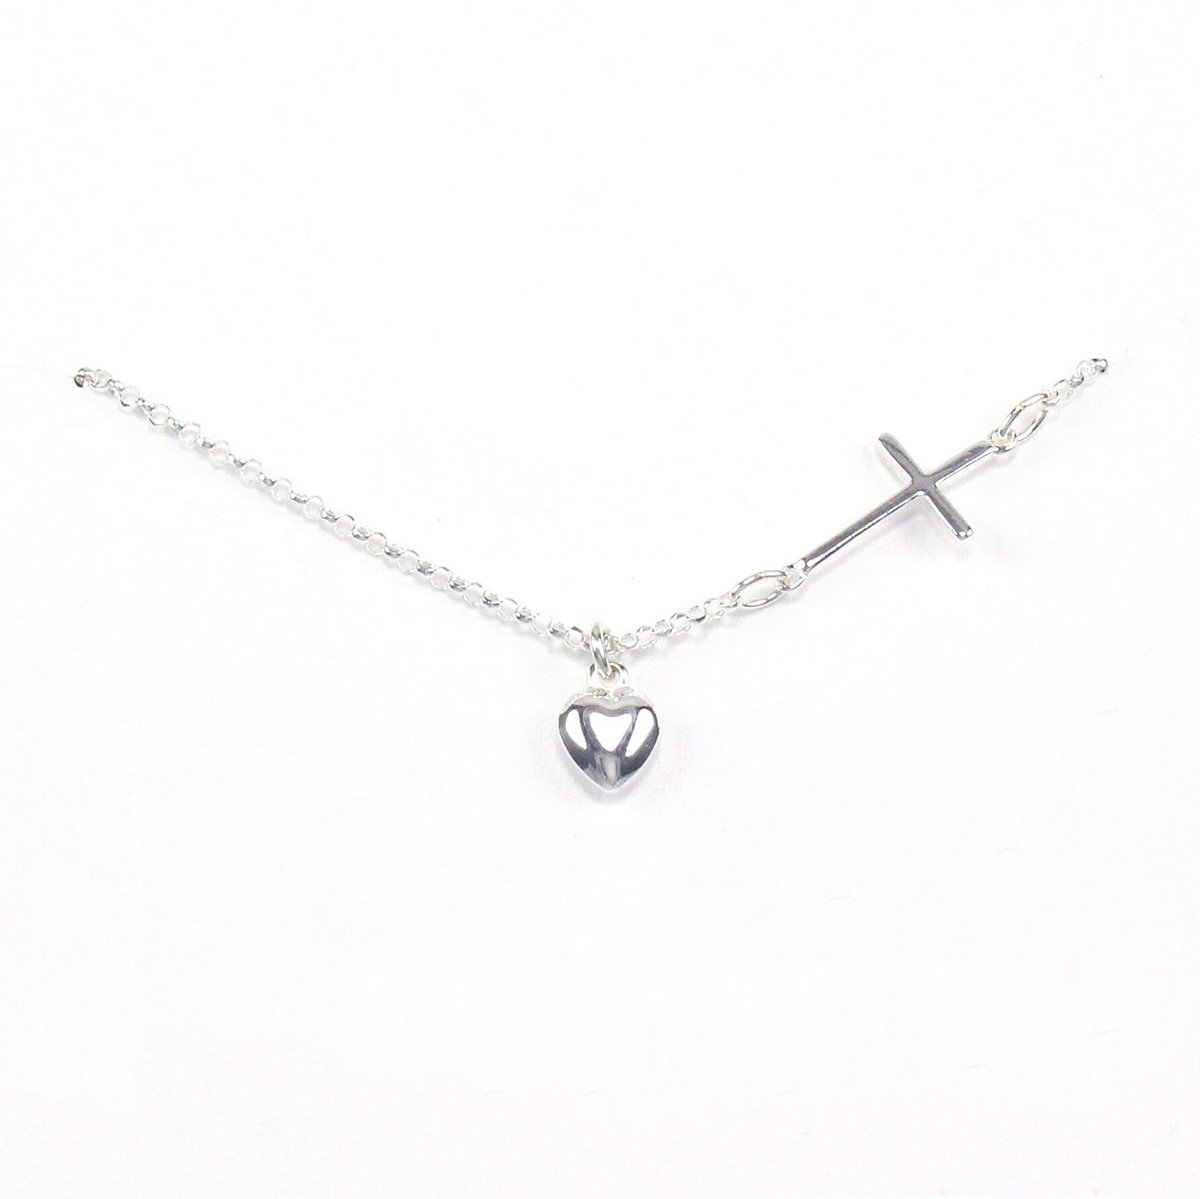 Sideways cross necklace sterling silver & small heart charm. Simple crucifix necklace, dainty side cross pendant jewelry for Christian women tuppu.net/c558e05f #etsygifts #shopsmall #handmadejewelry #etsyfinds #giftsforher #etsyshop #etsyseller #Etsy